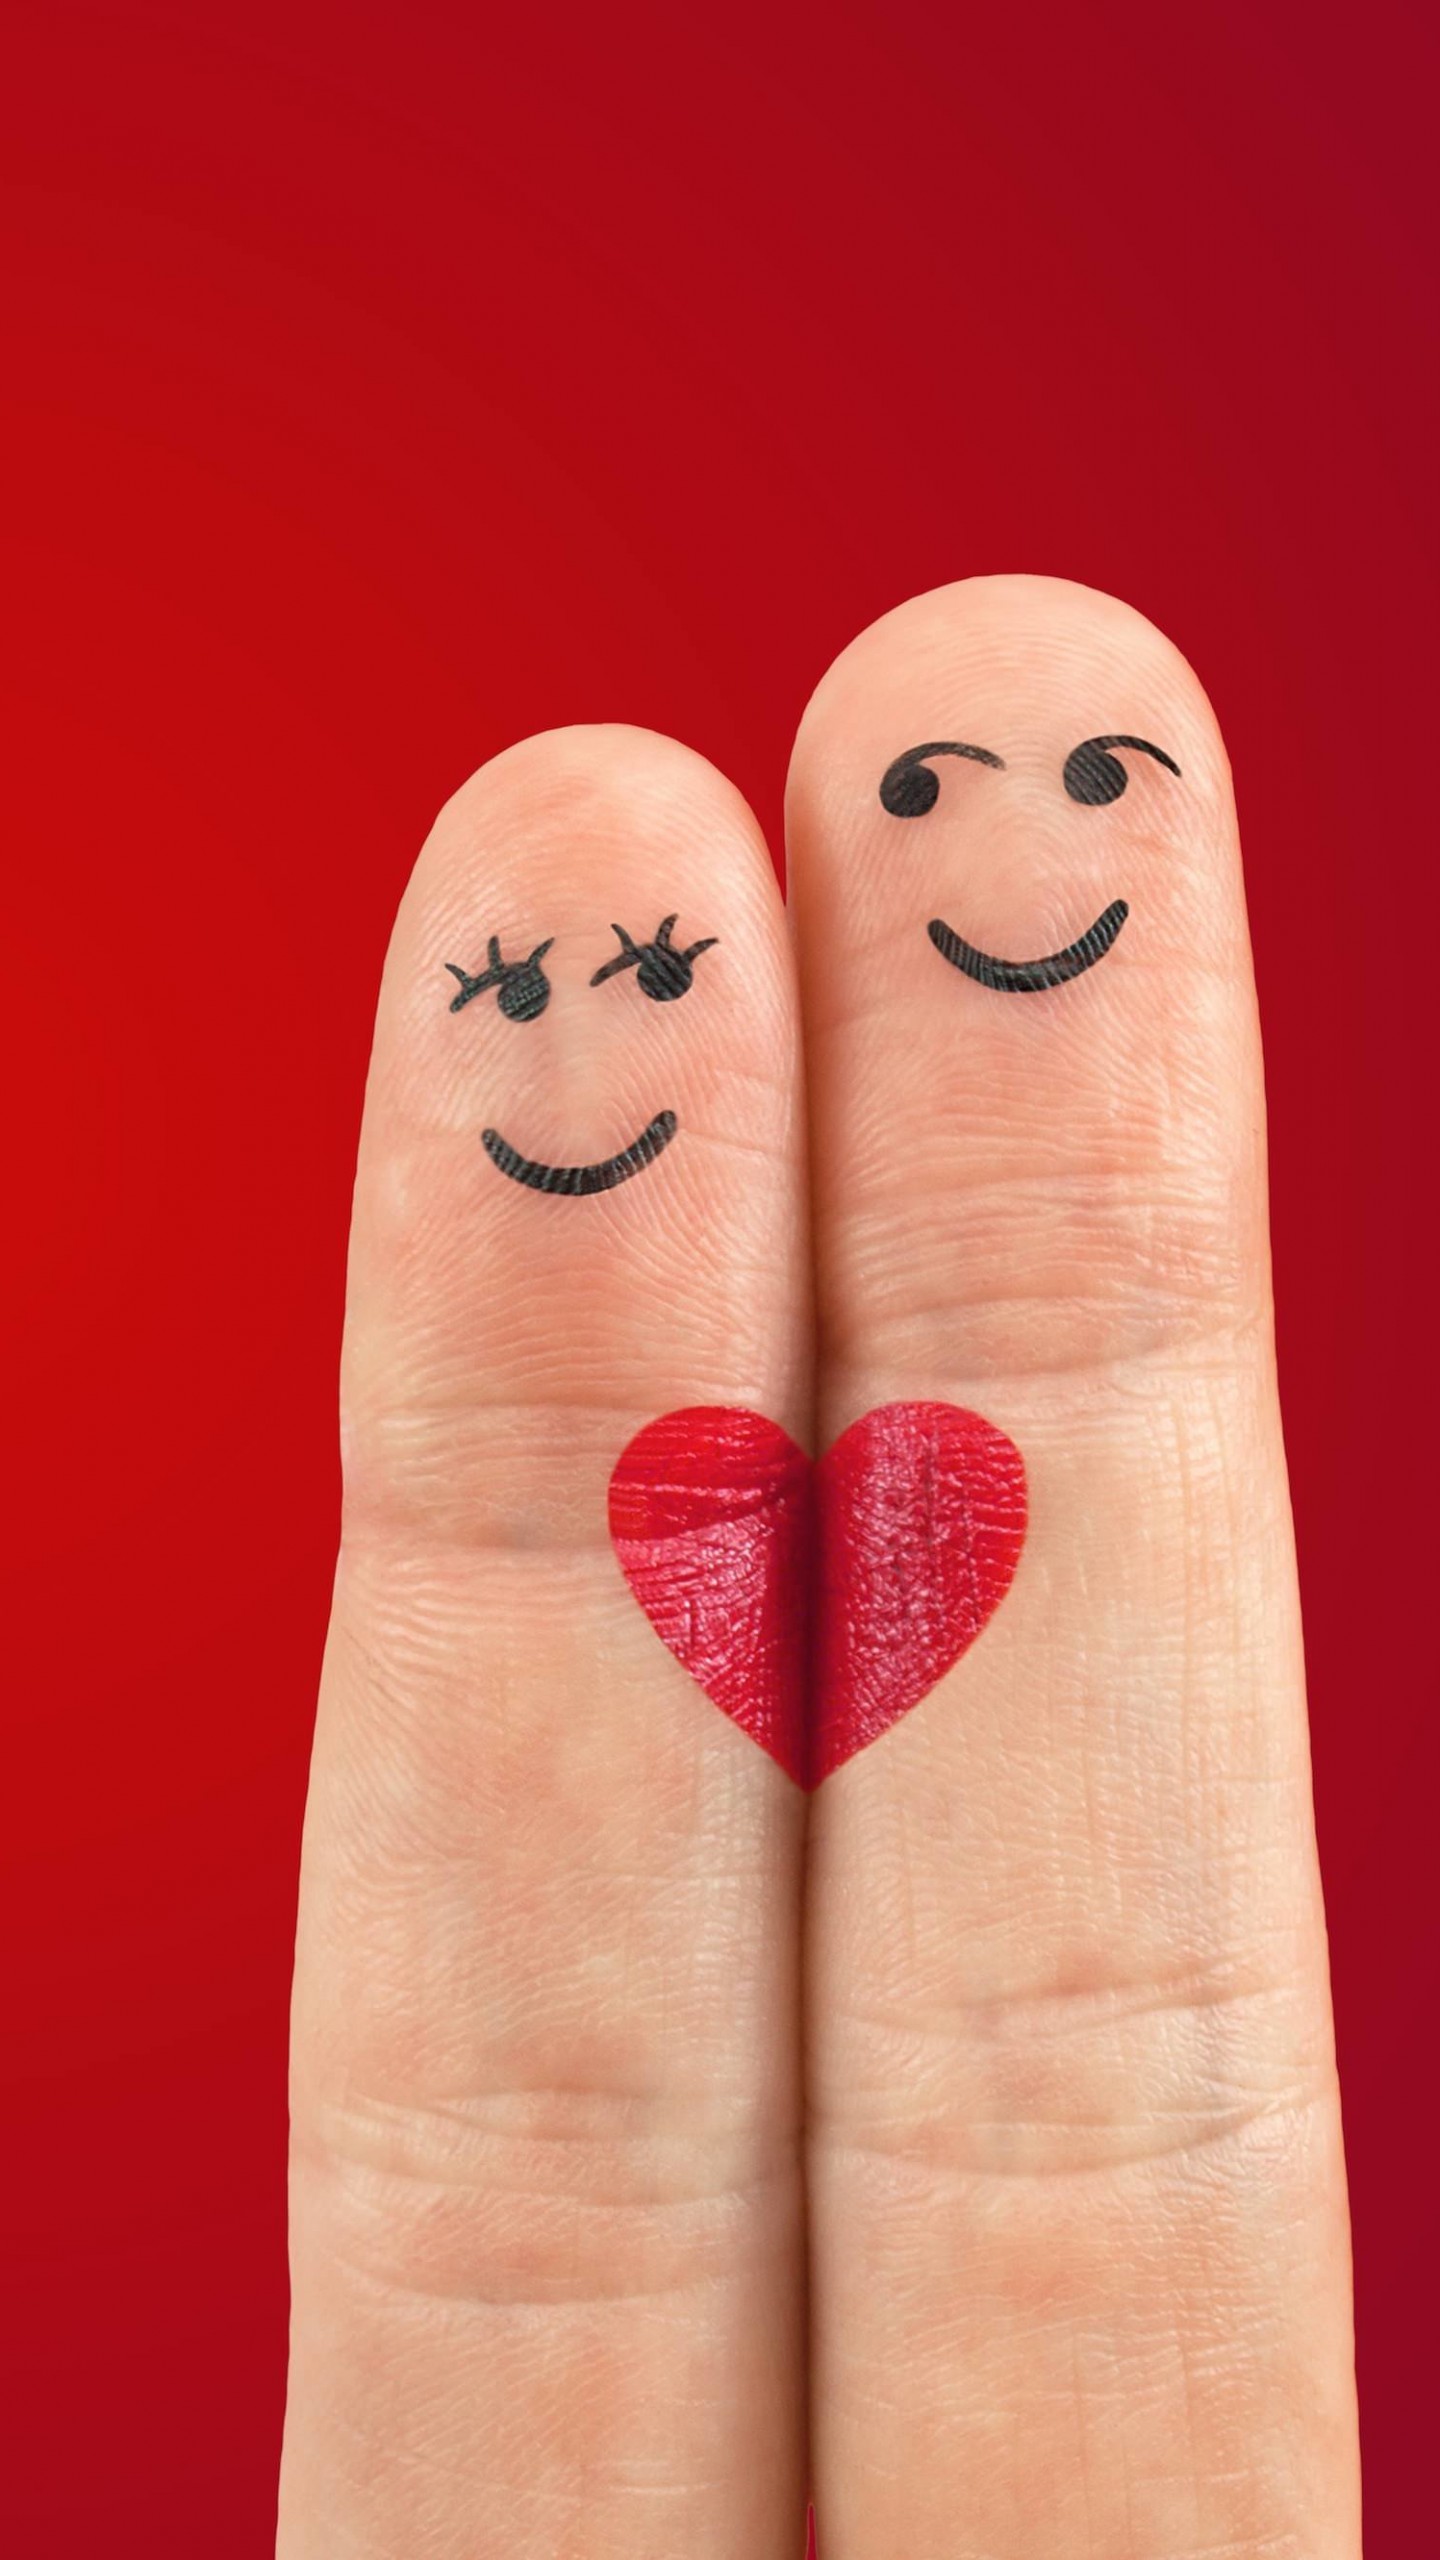 Fingers in Love Wallpaper for SAMSUNG Galaxy Note 4